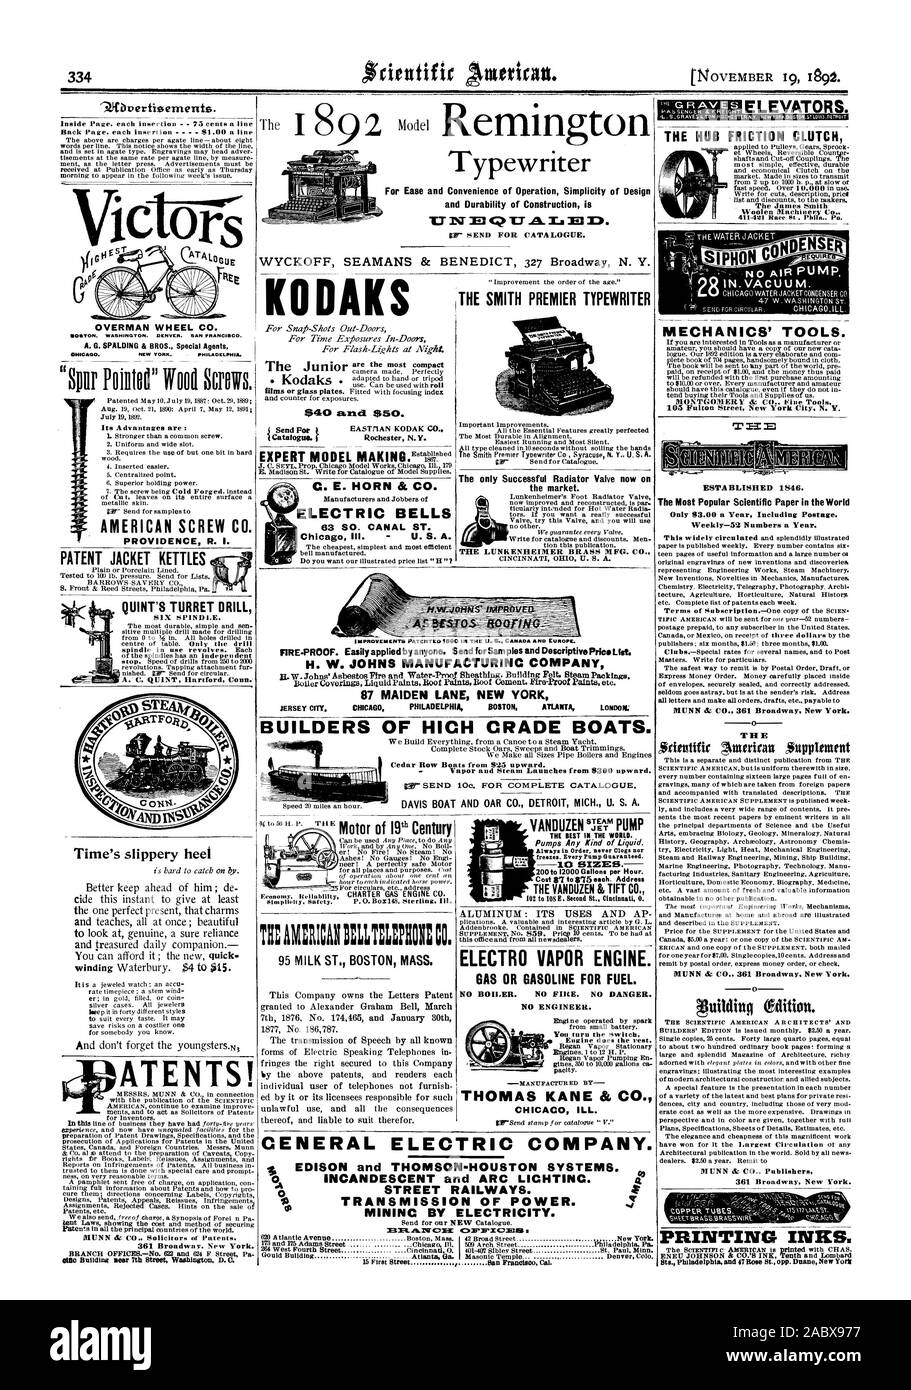 OVERMAN WHEEL CO. S OSTON. WASHINGTON. DENVER. SAN FRANCISCO. A. G. SPALDING & BROS. Special Agents AMERICAN SCREW CO. PROVIDENCE R. I. PATENT JACKET KETTLES Time's slippery heel ATENTS! THE HUB FRICTION CLUTCH The James Smith Woolen Machinery C MECHANICS' TOOLS. ESTABLISHED 1846. The Most Popular Scientific Paper in the World Only 83.00 a Year Including Postage. Weekly-52 Numbers a Year. T H E MUNN 6c CO 361 Broadway New York. MUNN & CO. Publishers PRINTING INKS. CENERAL ELECTRIC COMPANY. 0 INCANDESCENT and ARC LICHTINC. TRANSMISSION OF POWER. MININC BY ELECTRICITY. liar SEND 10e FOR COMPLETE Stock Photo